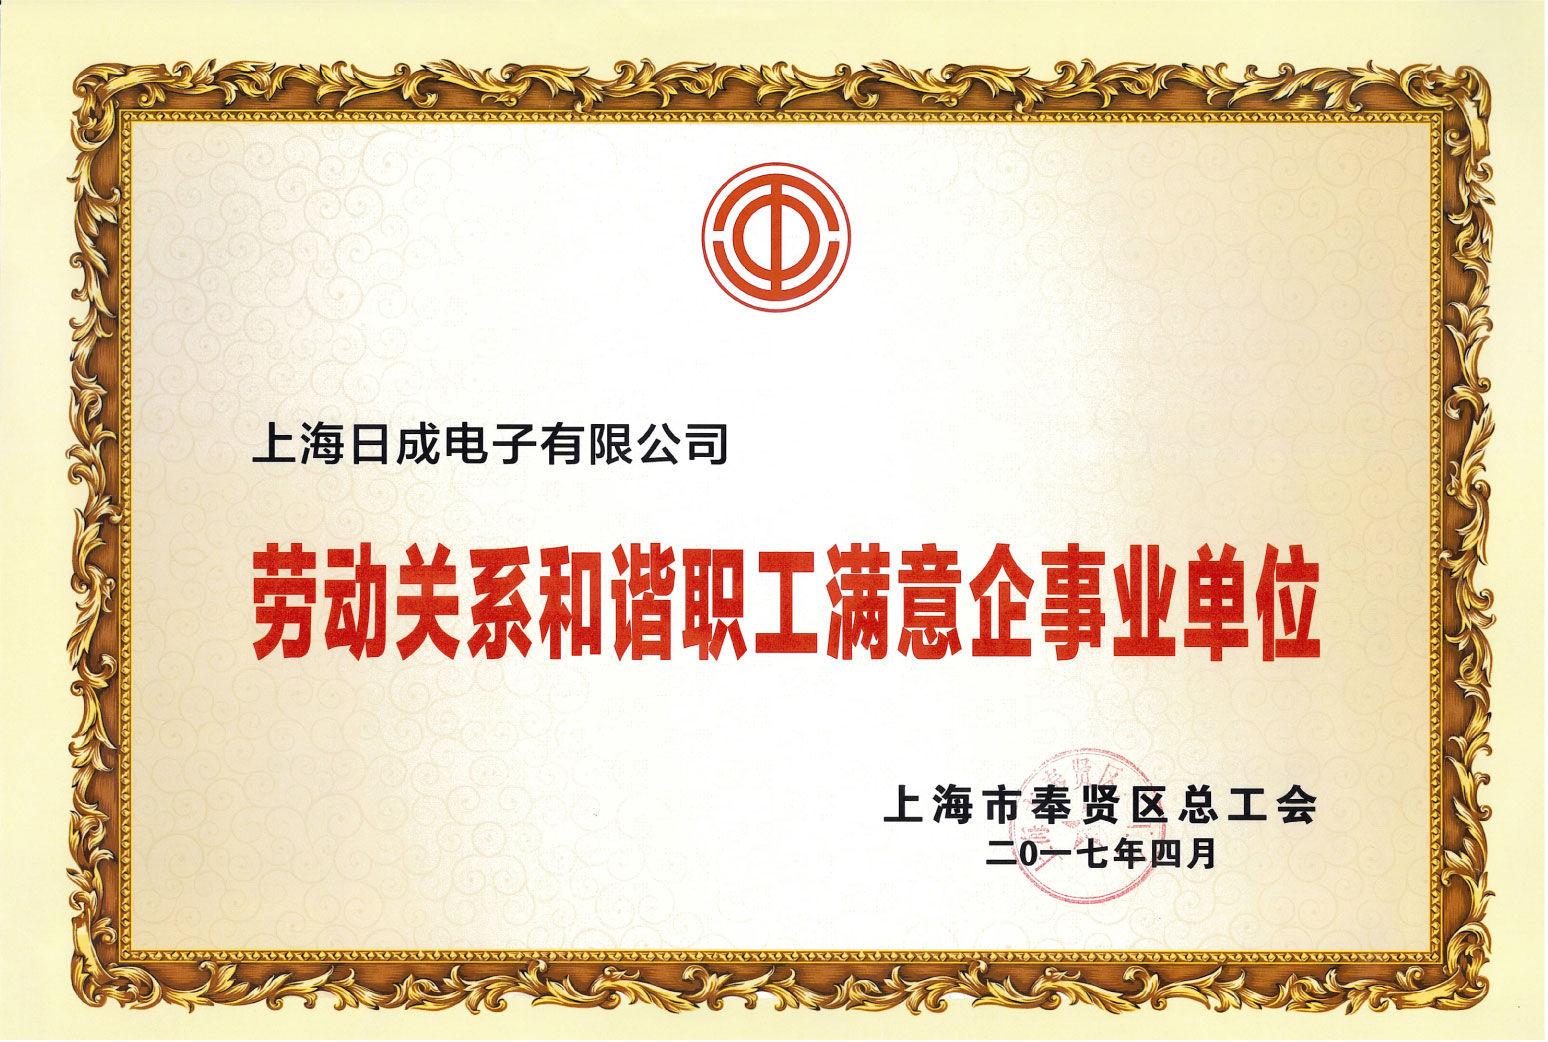 Labor relations harmonious workers satisfied with the enterprises and institutions Award